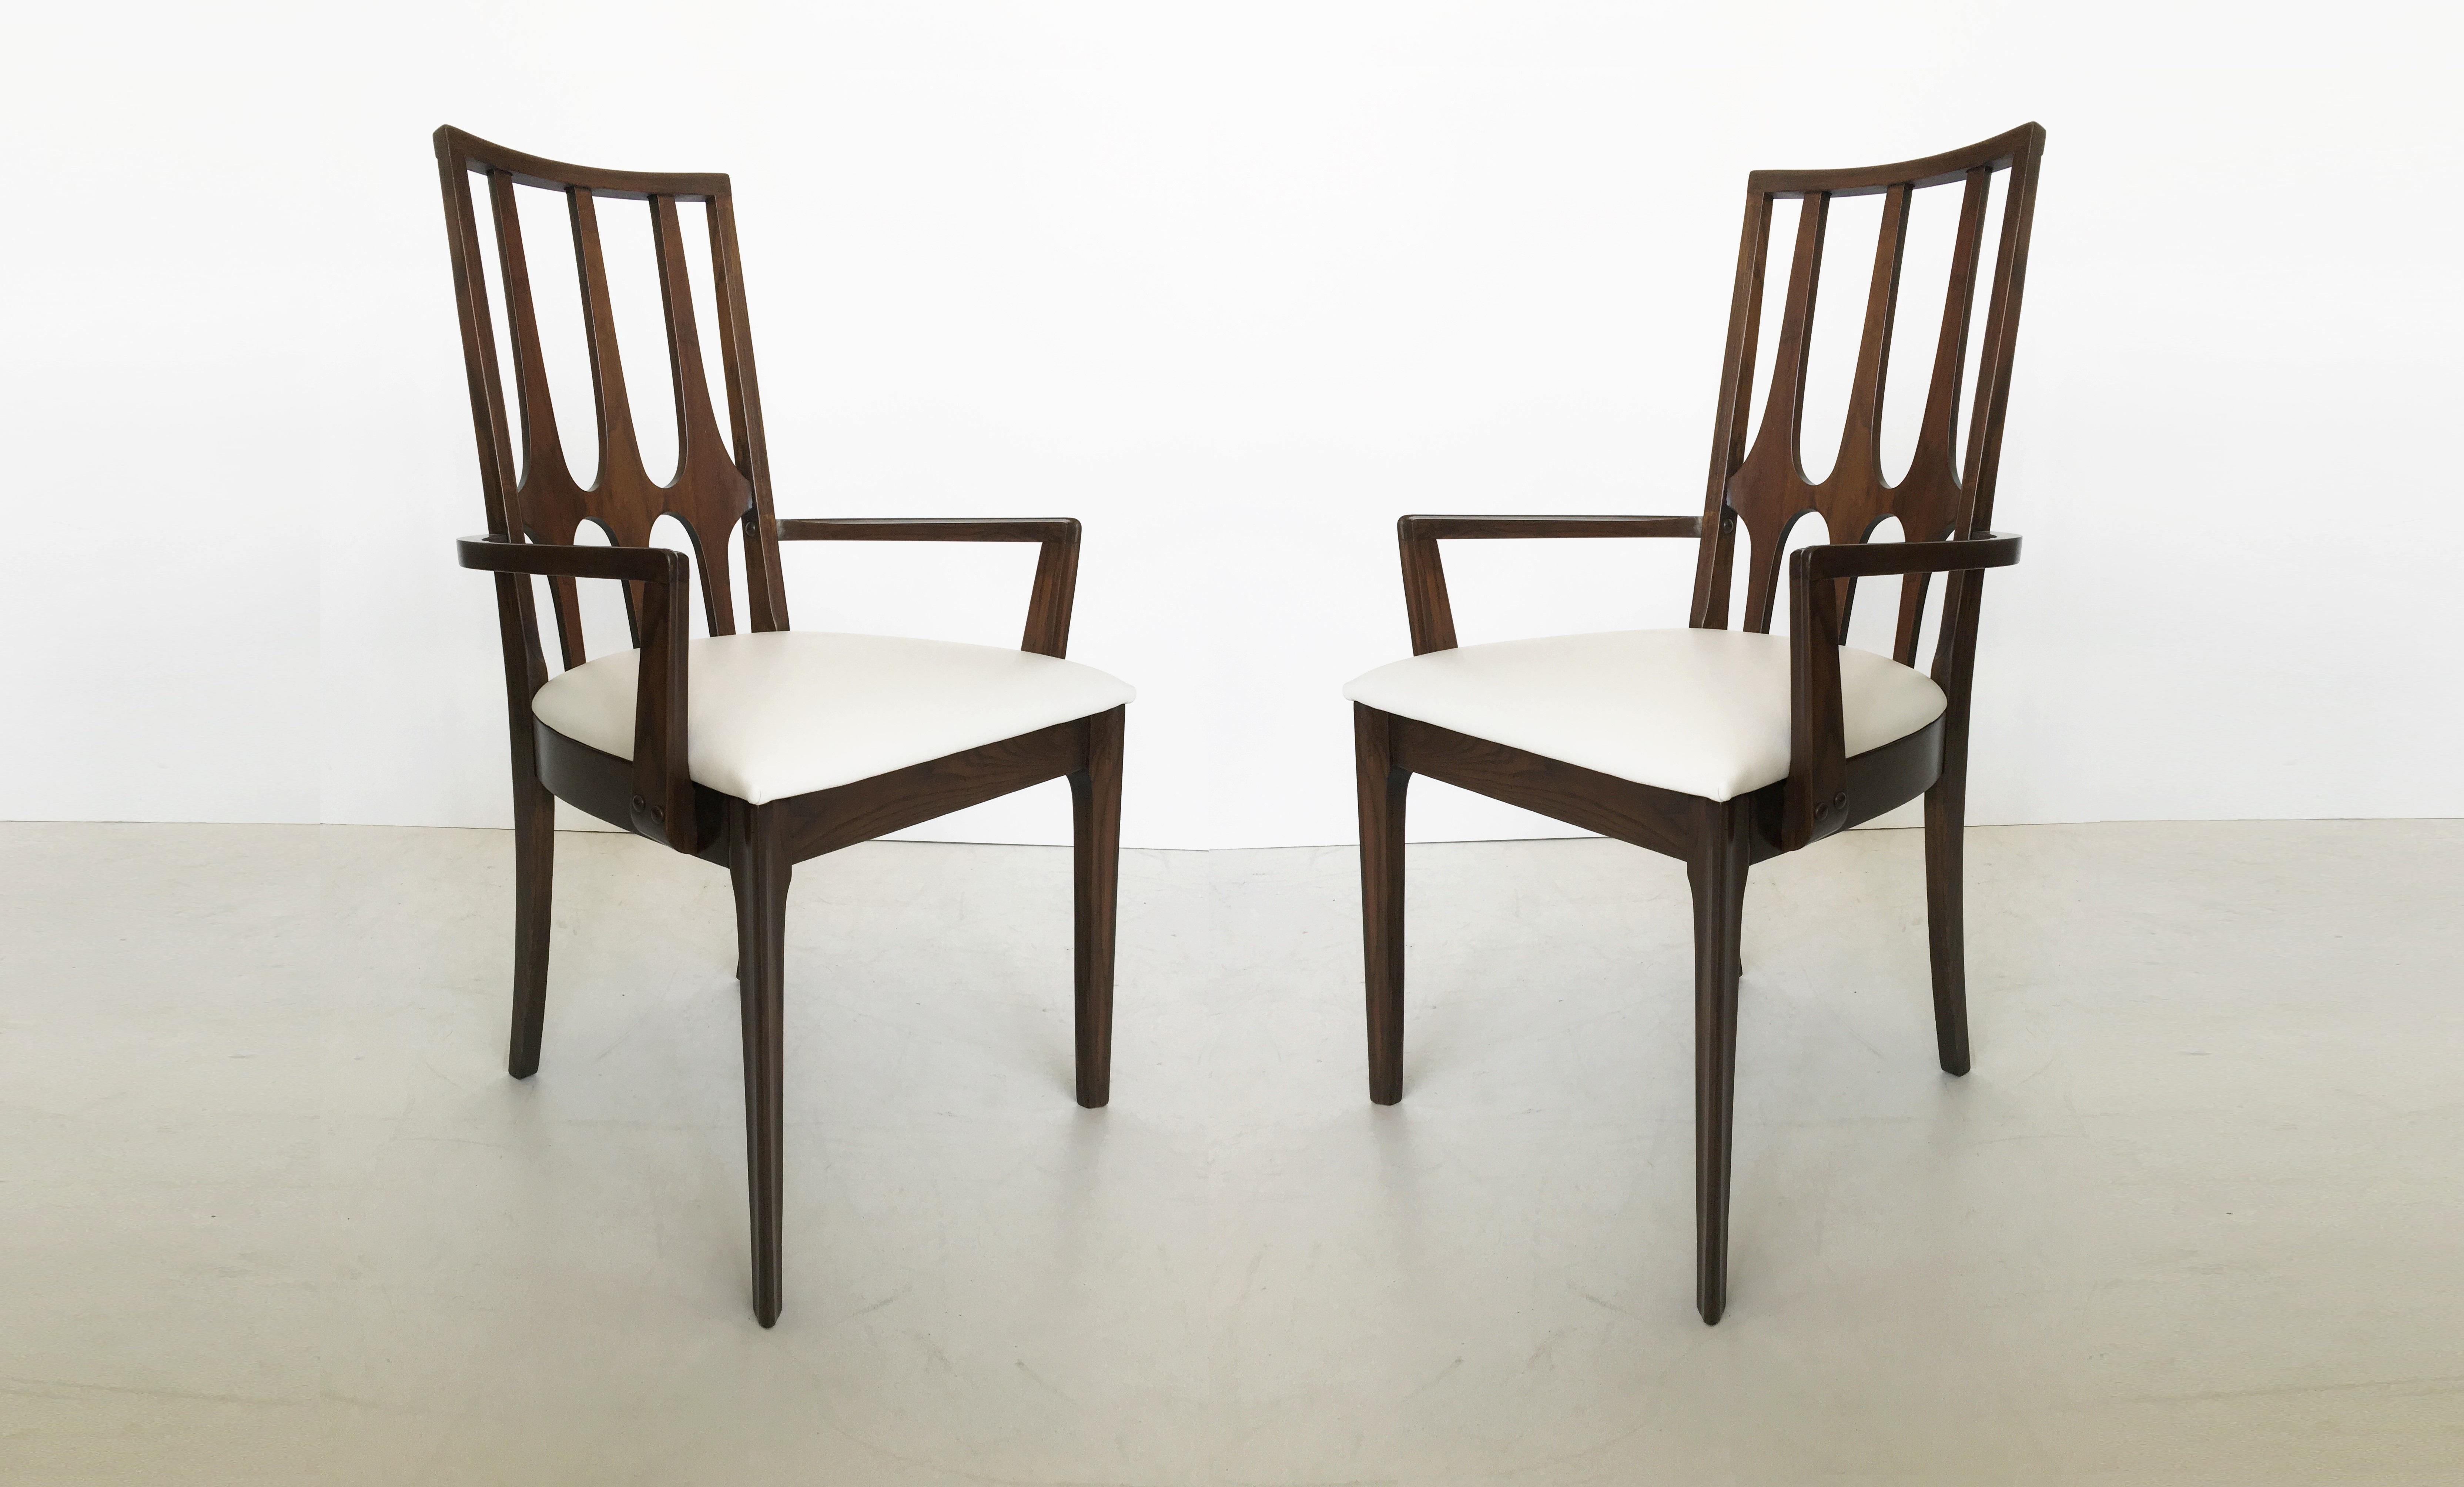 Stunning set of eight Mid-Century Modern Broyhill Brasilia dining chairs. Highly sought after and collectible designed by the legendary Oscar Niemeyer, 1960s. The set features two captain’s chair and four armless side chairs. The seats have been